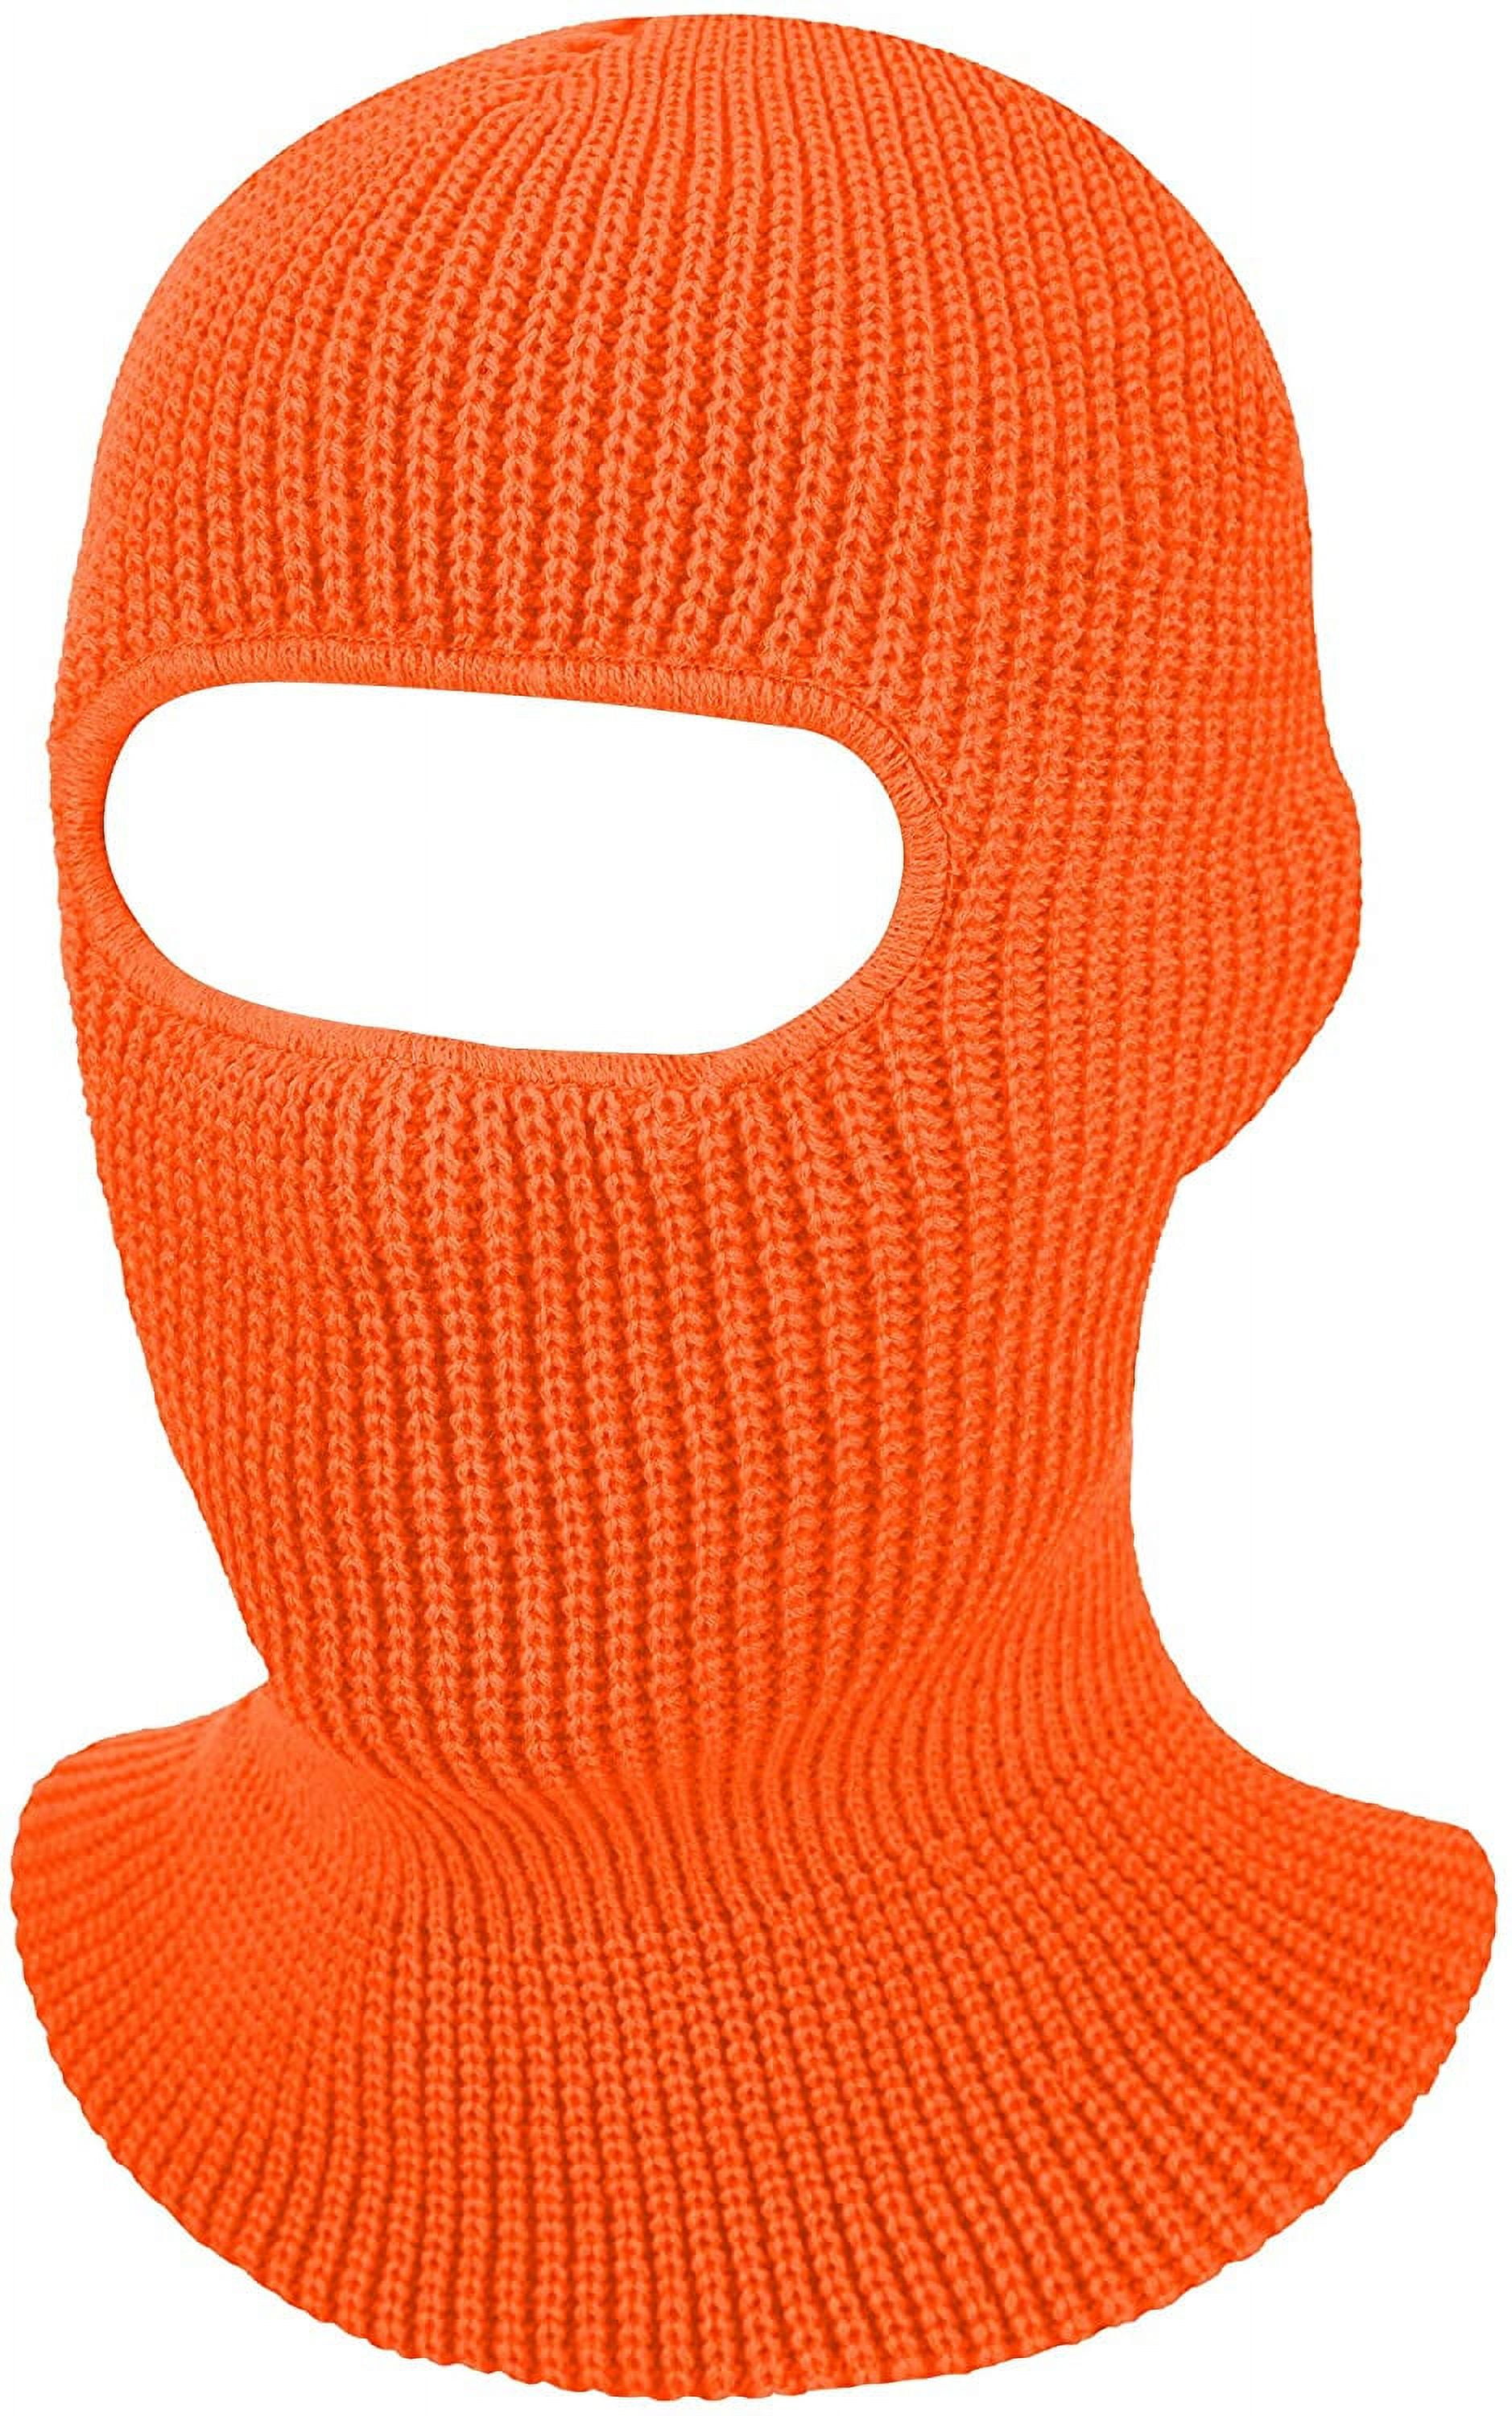 1-Hole Unisex Face Ski Balaclava Winter Outdoor ZOELNIC Sports, Balaclava for Full Mask Face Cap Warm Knitted Beanie Pink Knit Cover Adult